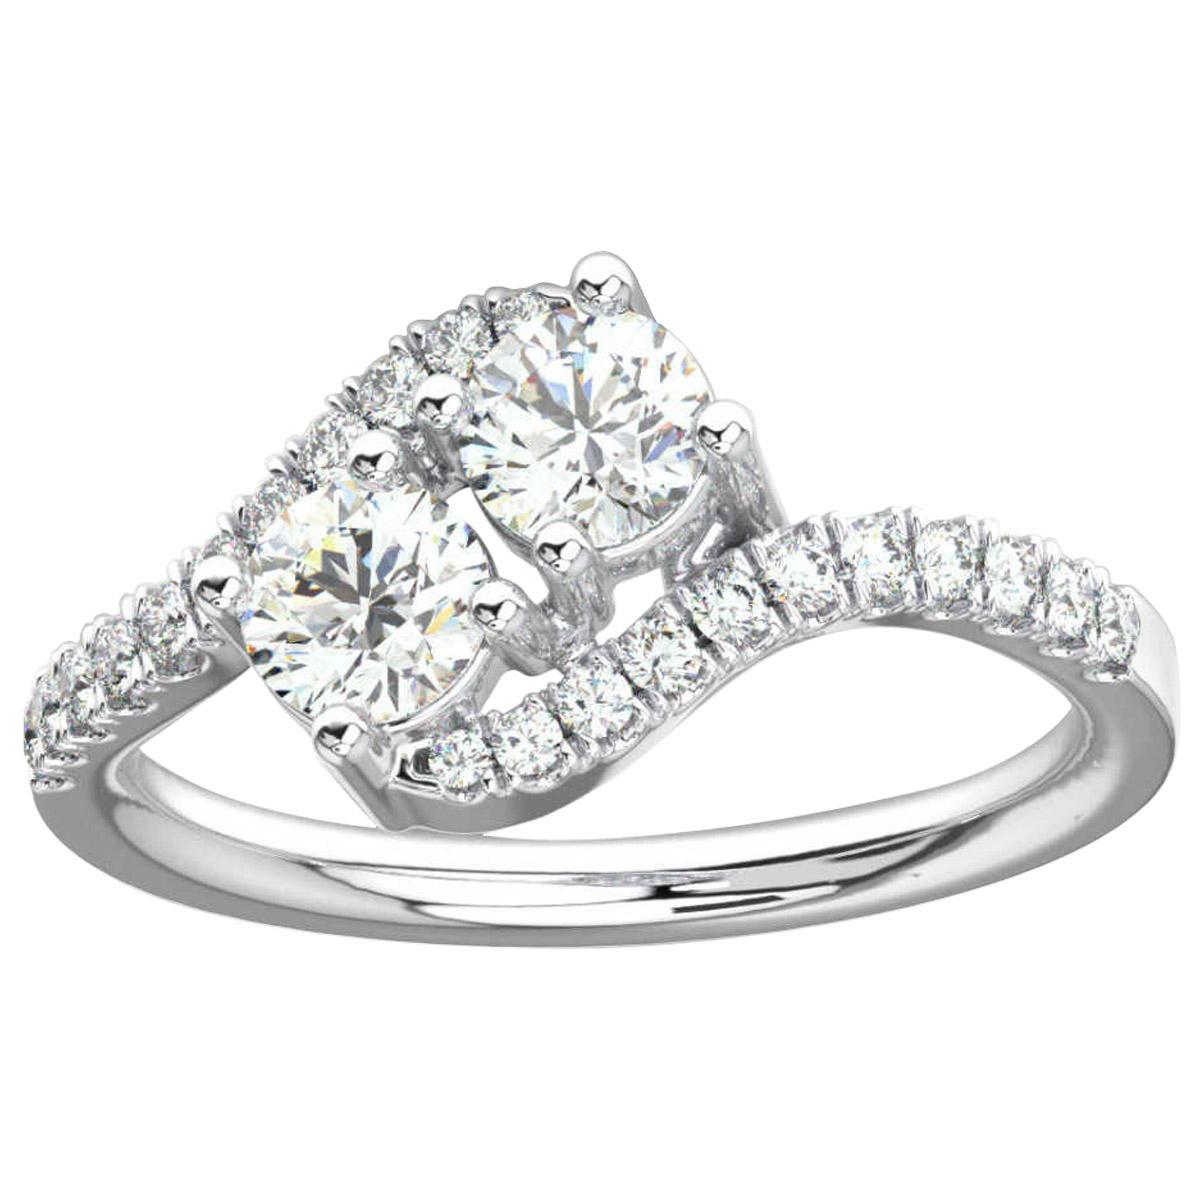 18K White Gold Artemis Micro Prong Diamond Ring '1 Ct. tw' For Sale